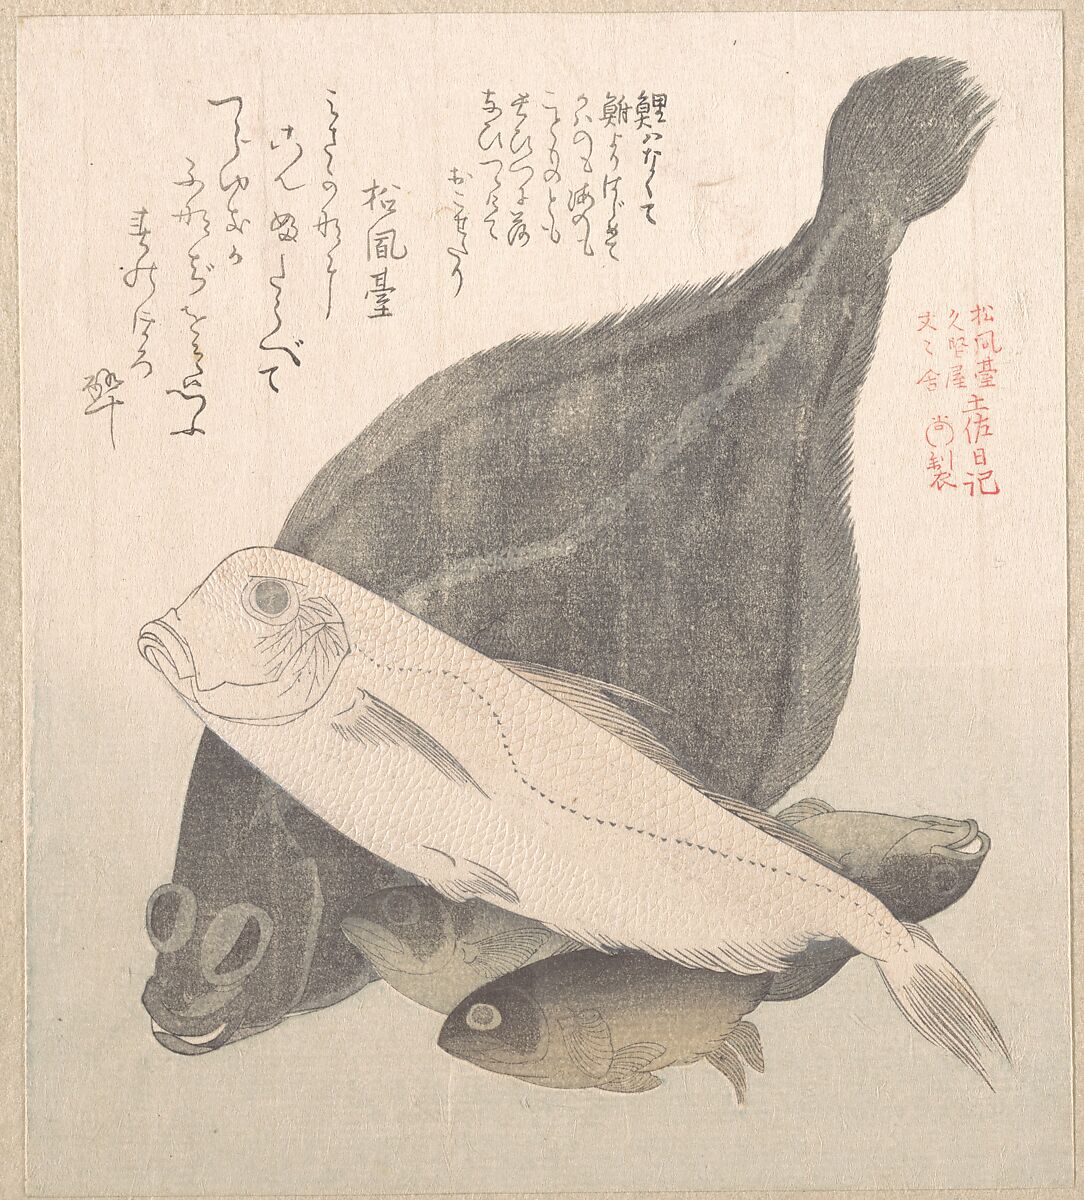 Flounder and Other Fishes, Kubo Shunman (Japanese, 1757–1820) (?), Woodblock print (surimono); ink and color on paper, Japan 